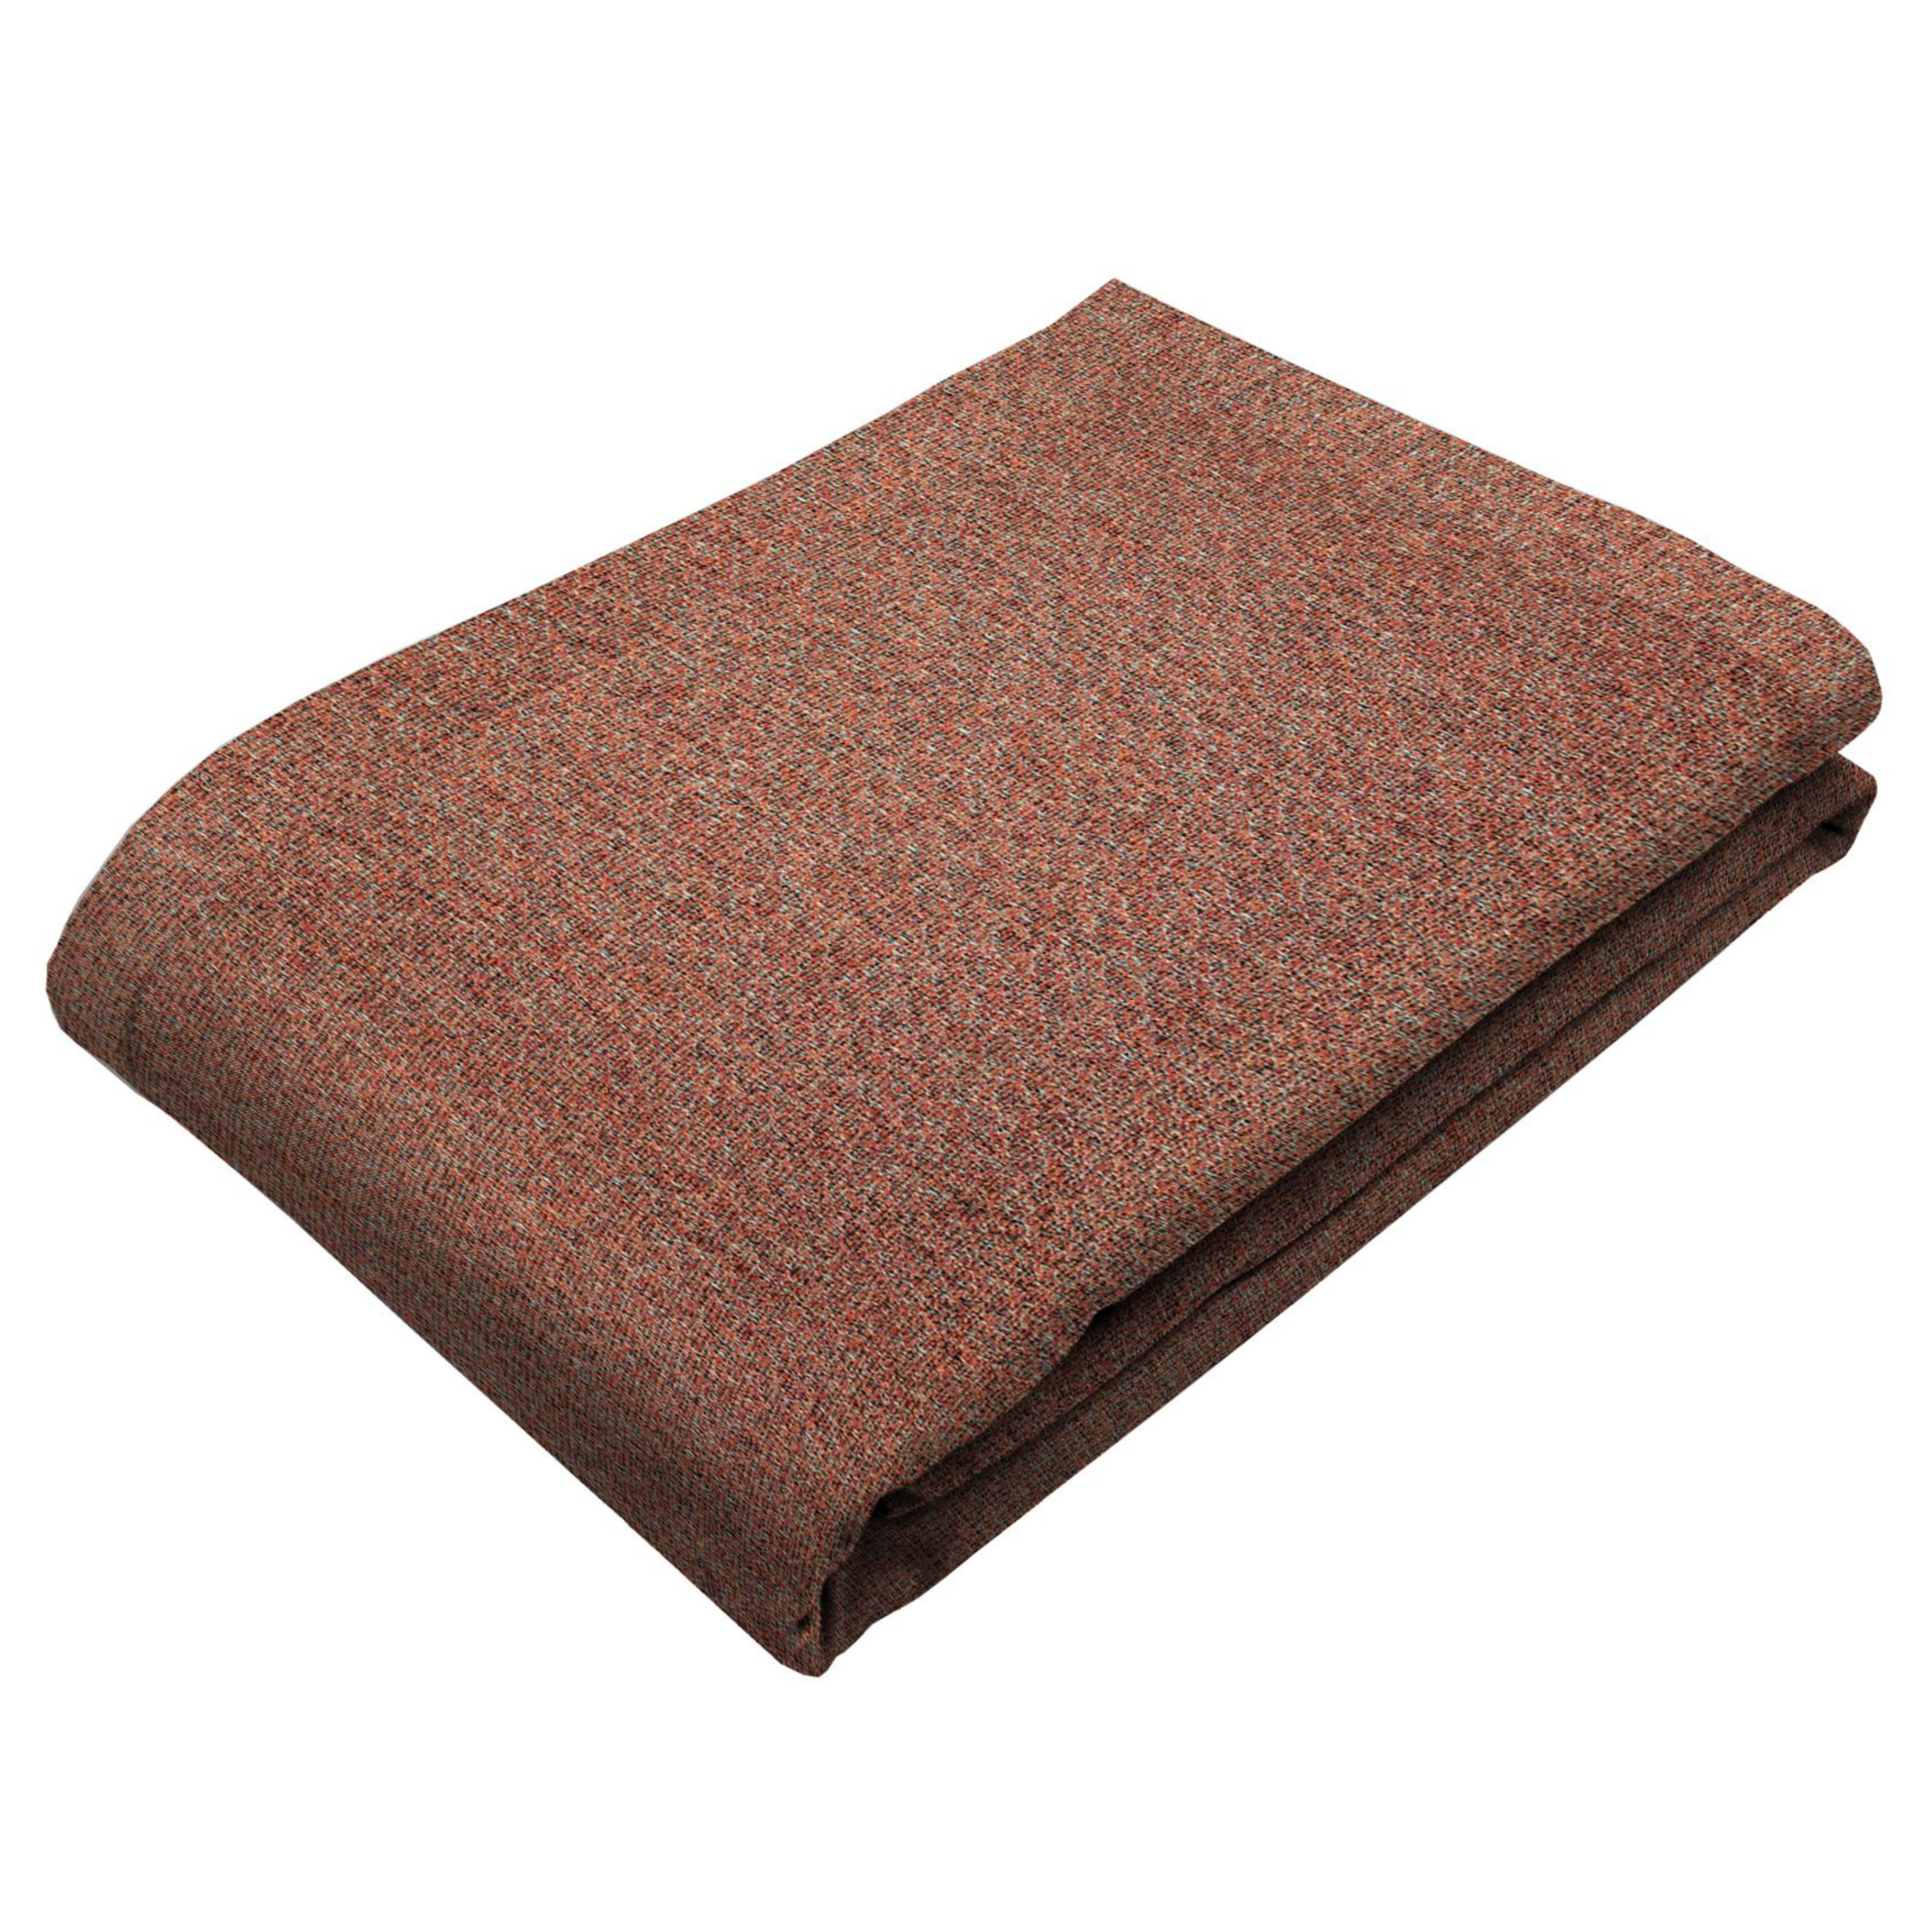 McAlister Textiles Highlands Terracotta Throws & Runners Throws and Runners Bed Runner (50cm x 240cm) 